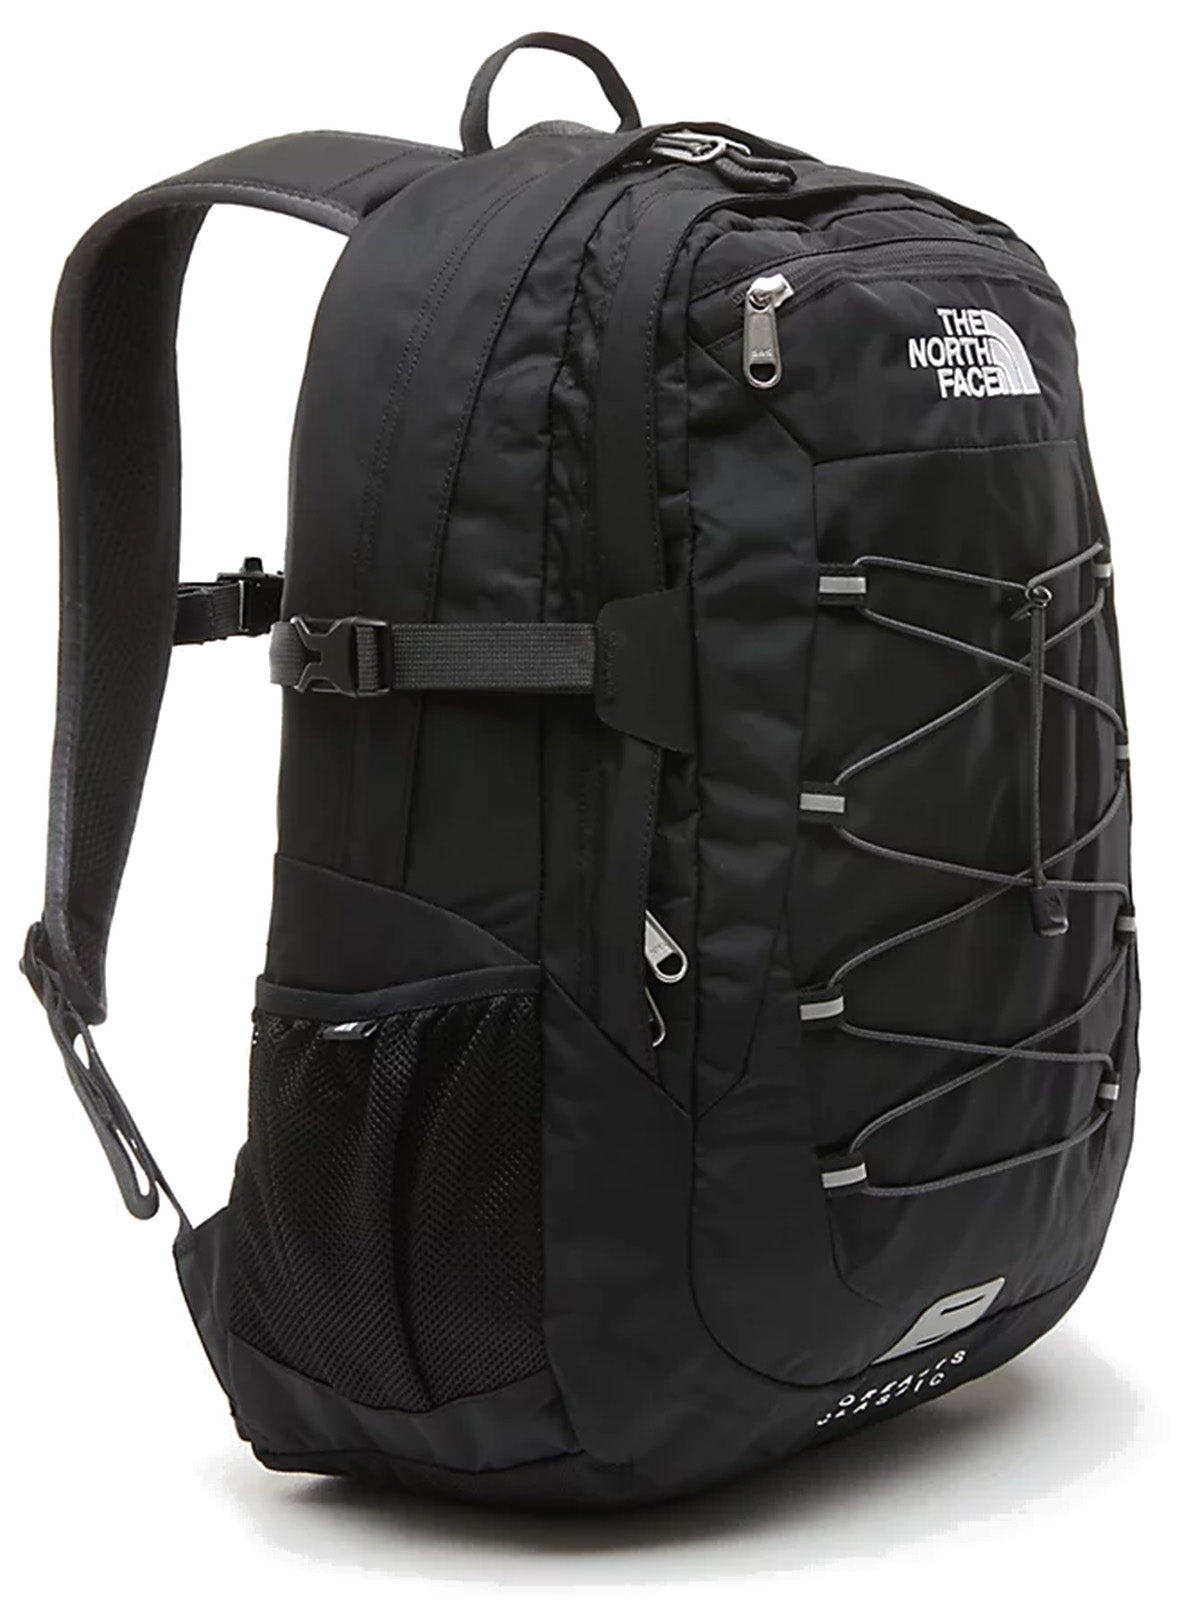 The North Face Men's Casual Backpacks - Borealis Classic Backpack - Black